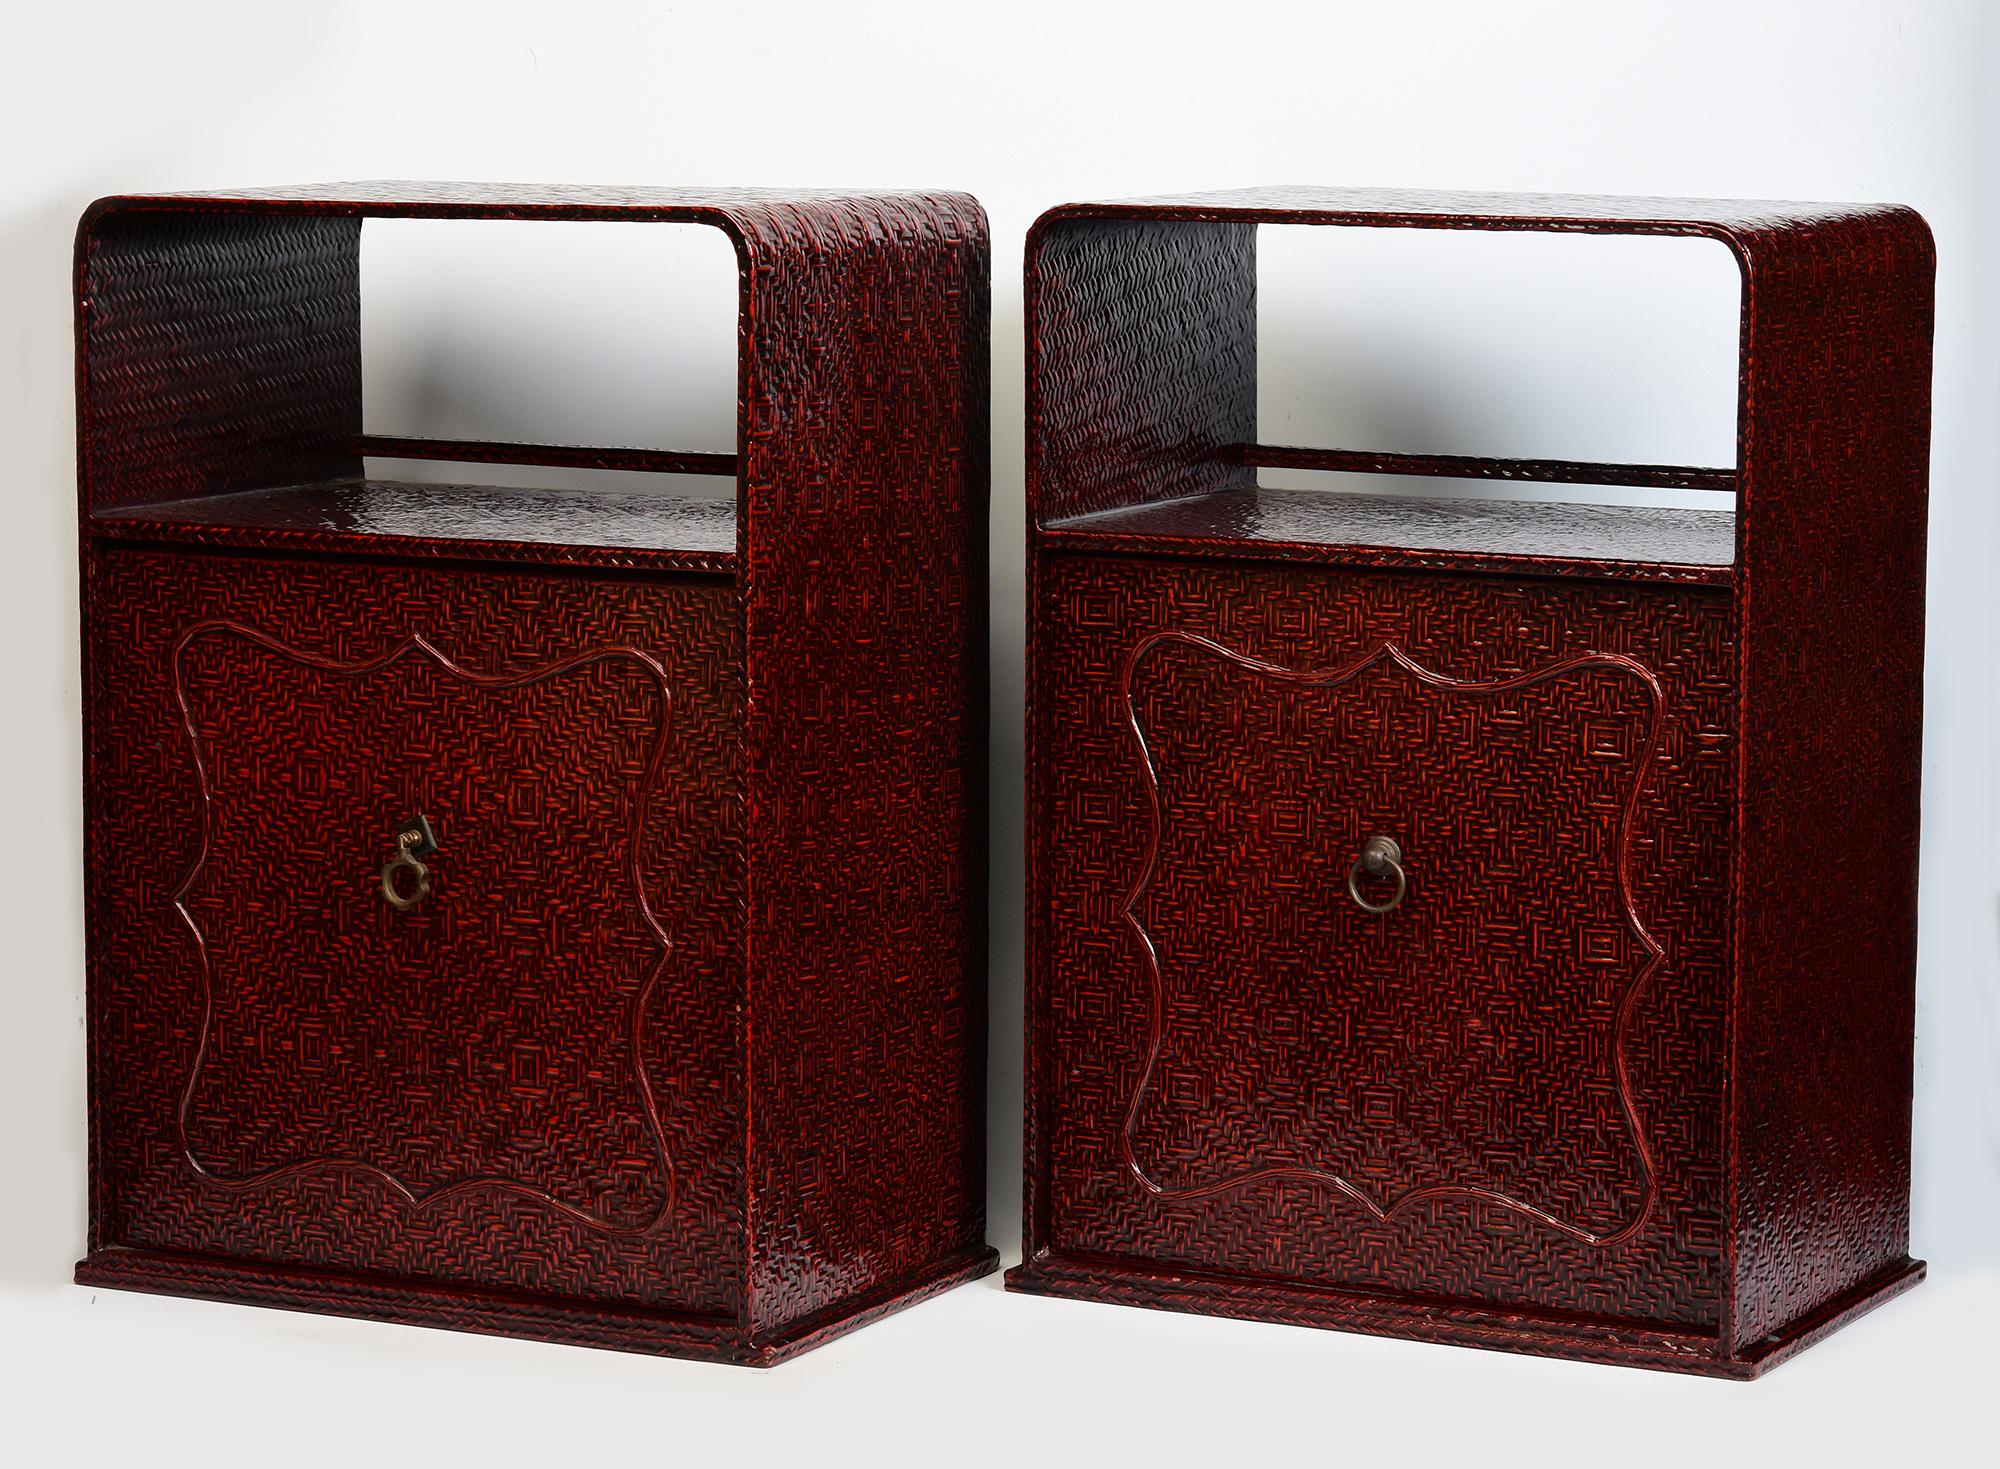 A pair of antique Japanese wooden red lacquered cabinet.

Age: Japan, 19th Century
Size: Height 55.5 C.M. / Width 40.5 C.M. / Depth 25.6 C.M.
Condition: Nice condition overall.

100% satisfaction and authenticity guaranteed with free 